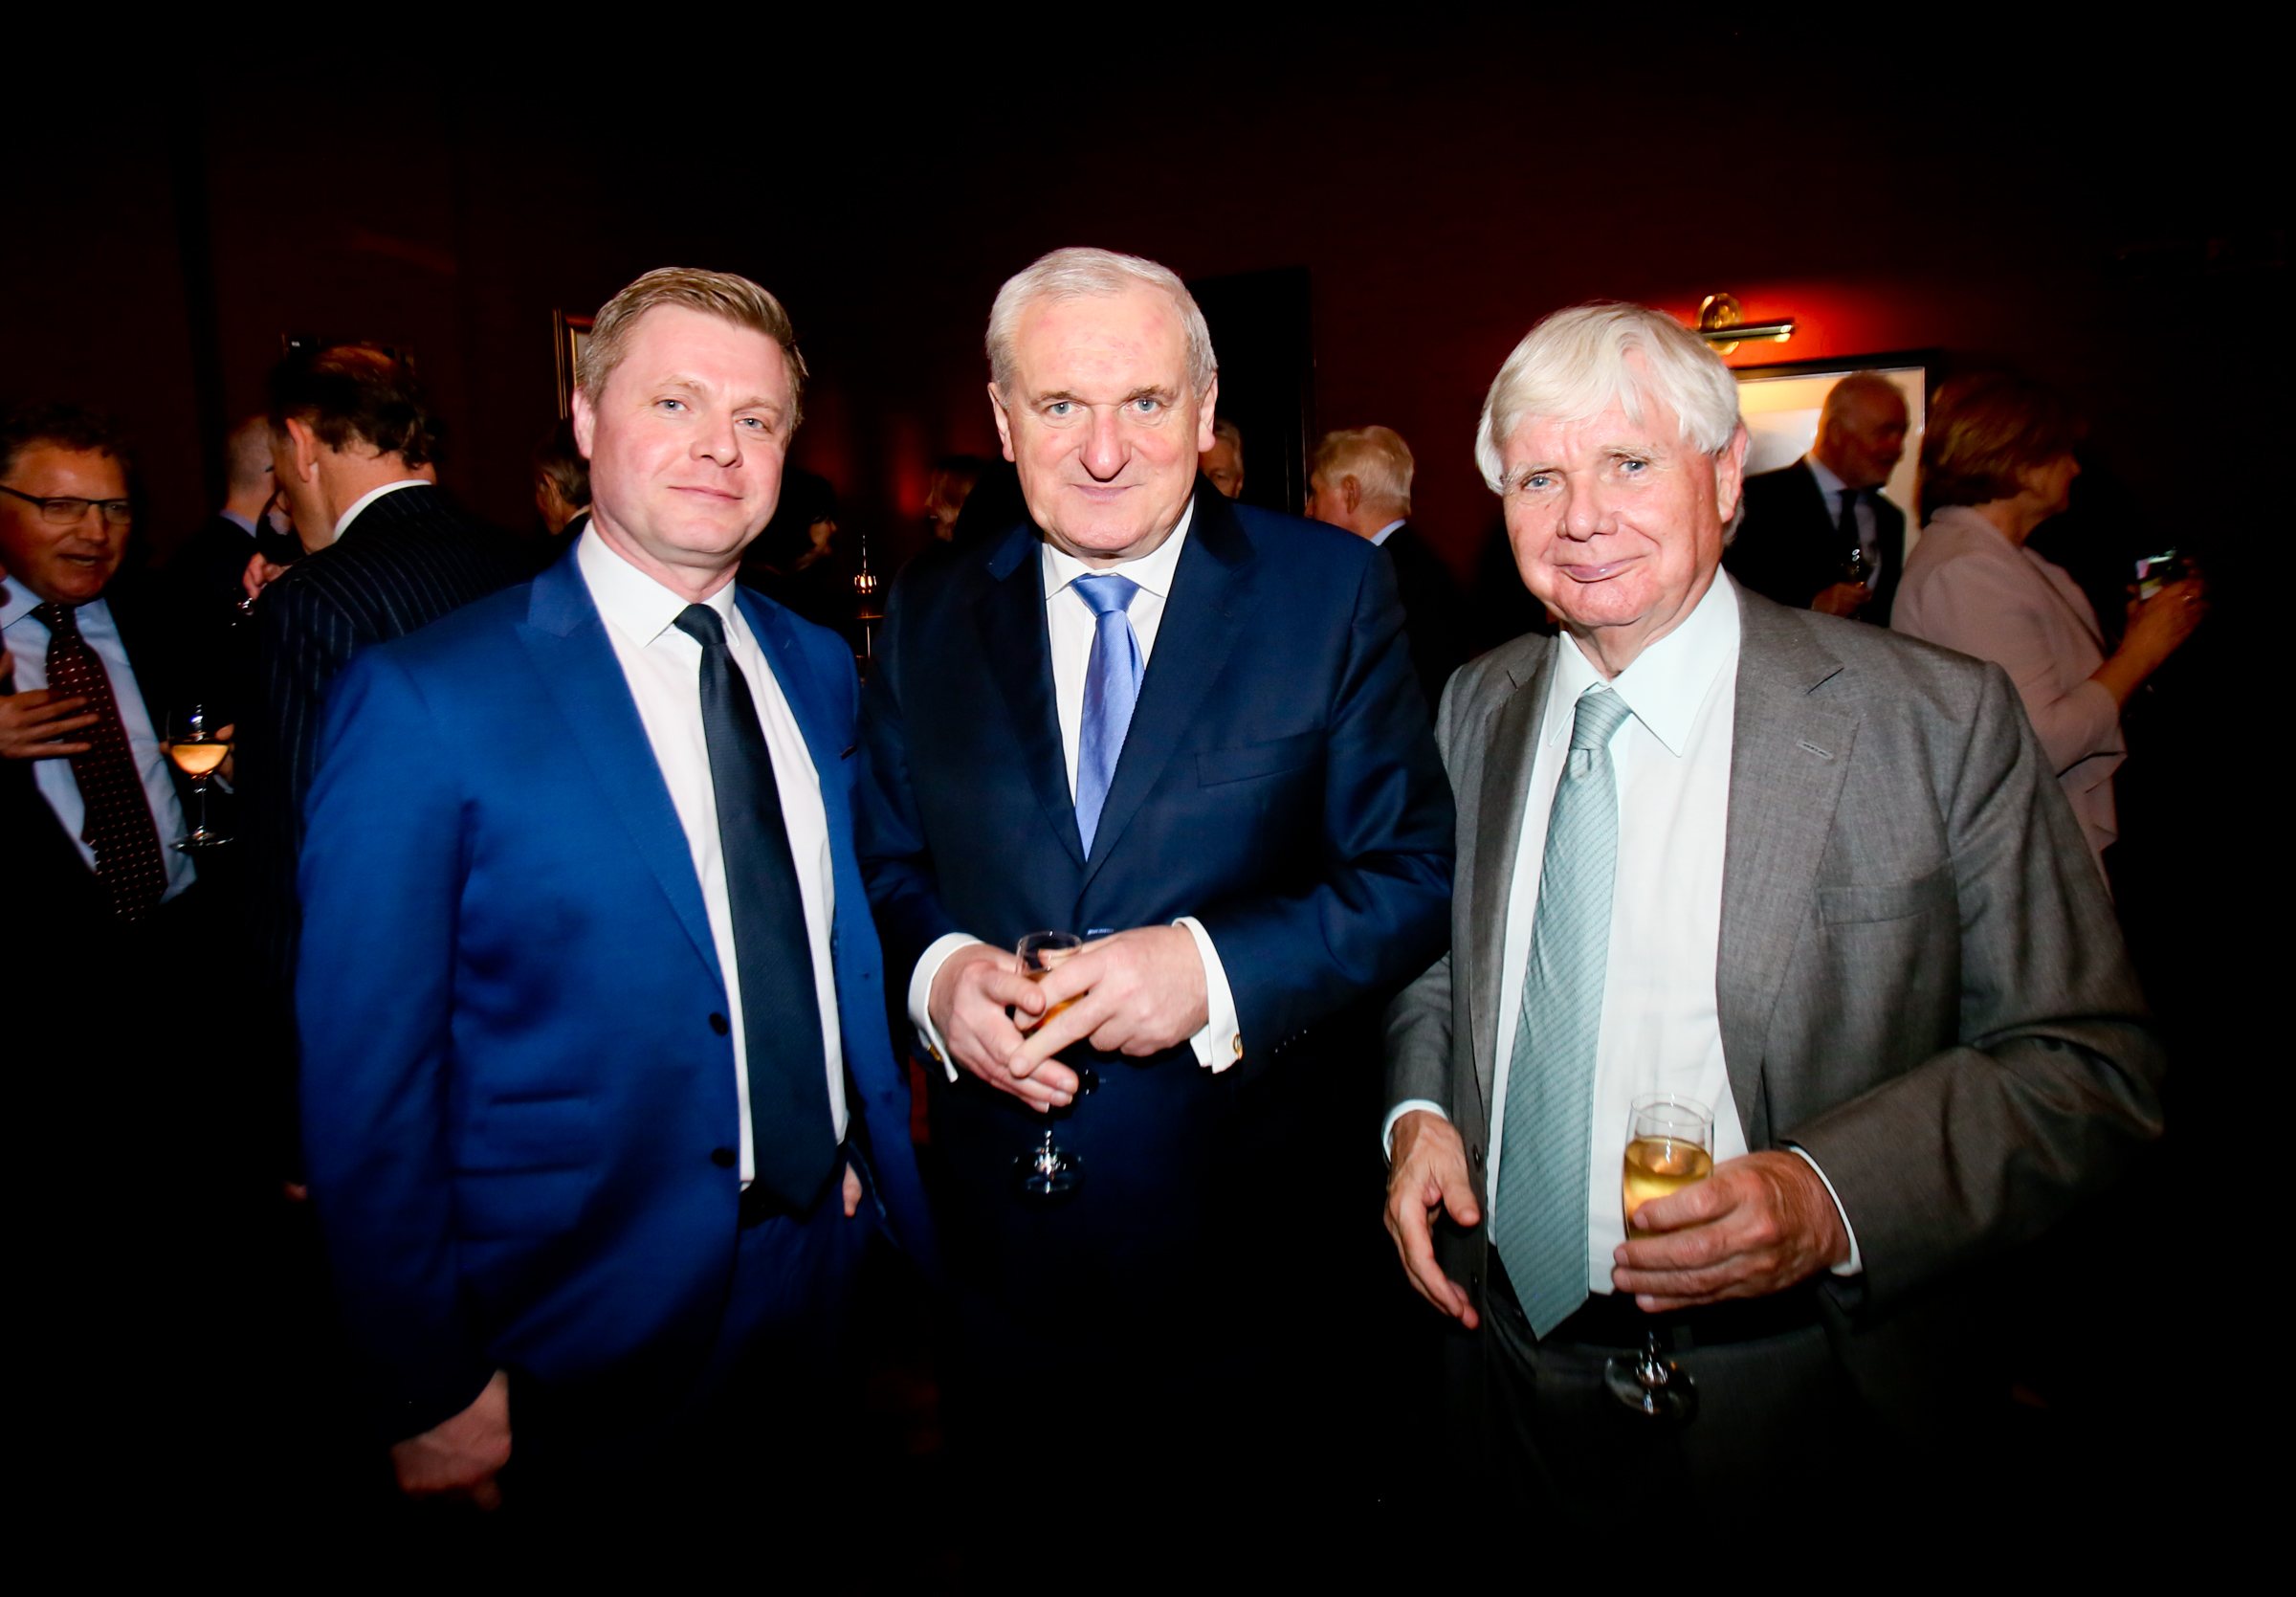  Former Taoiseach Bertie Ahern with Harcourt chairman Pat Doherty and son John Paul Doherty 